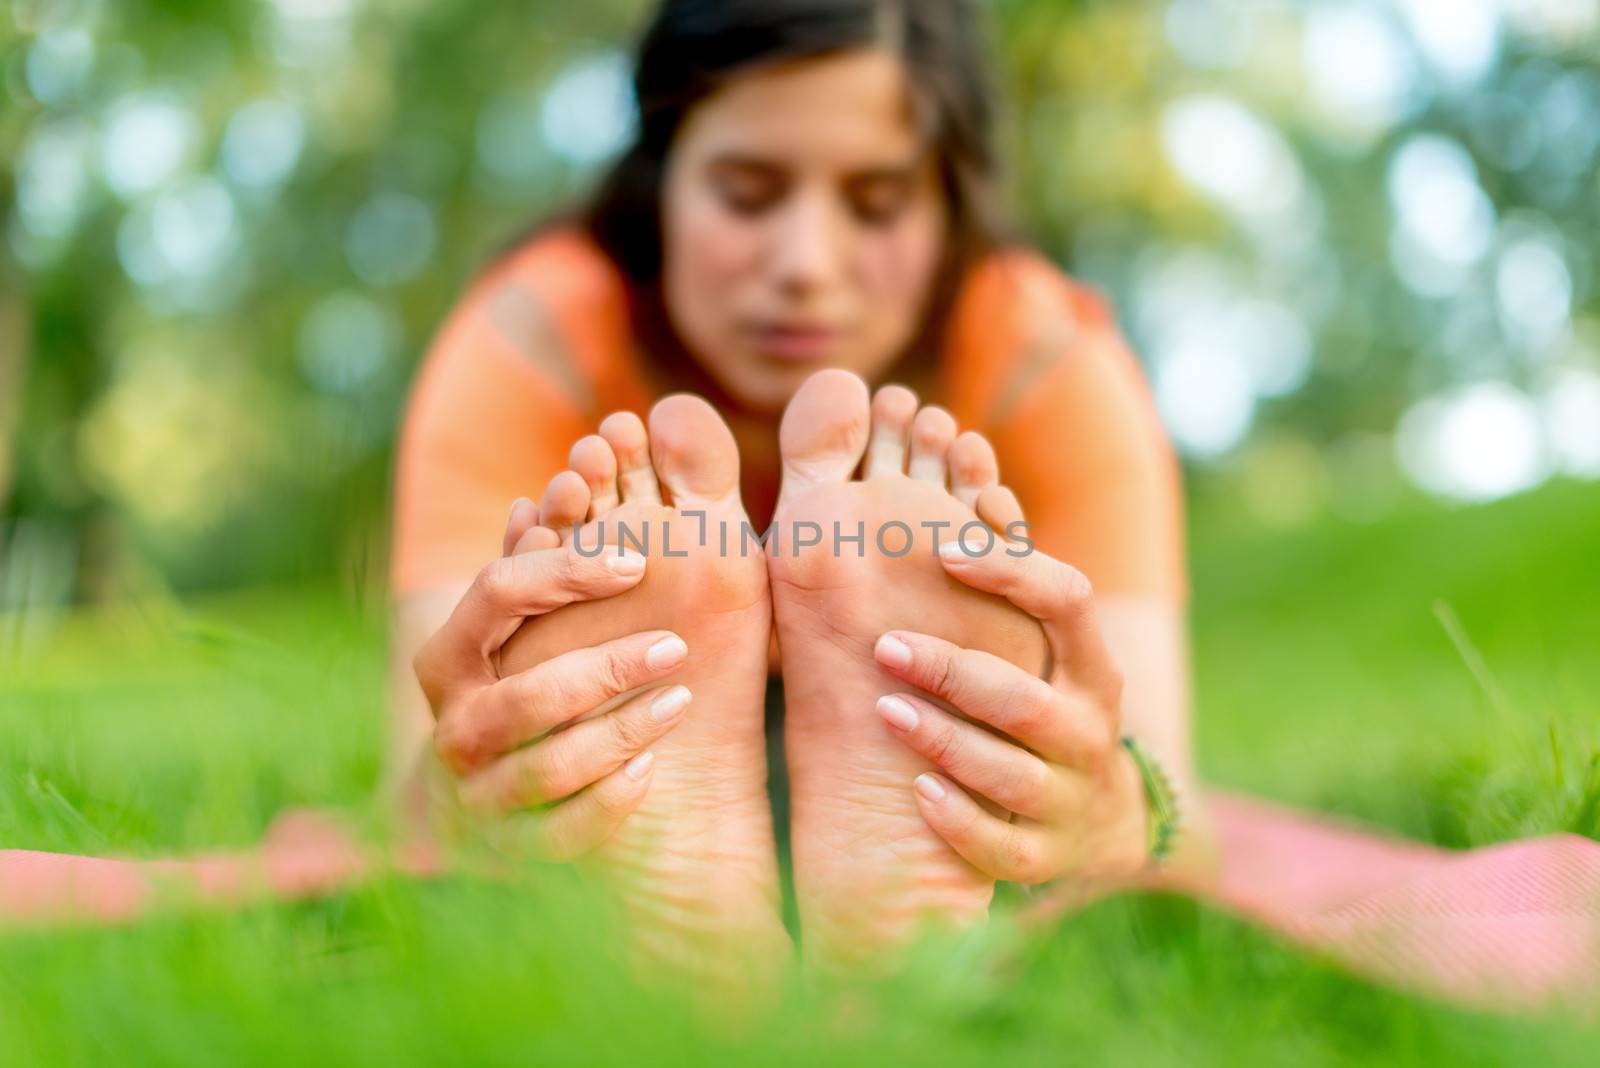 Feet detail of a girl meditation and taking a yoga pose at sunset under trees